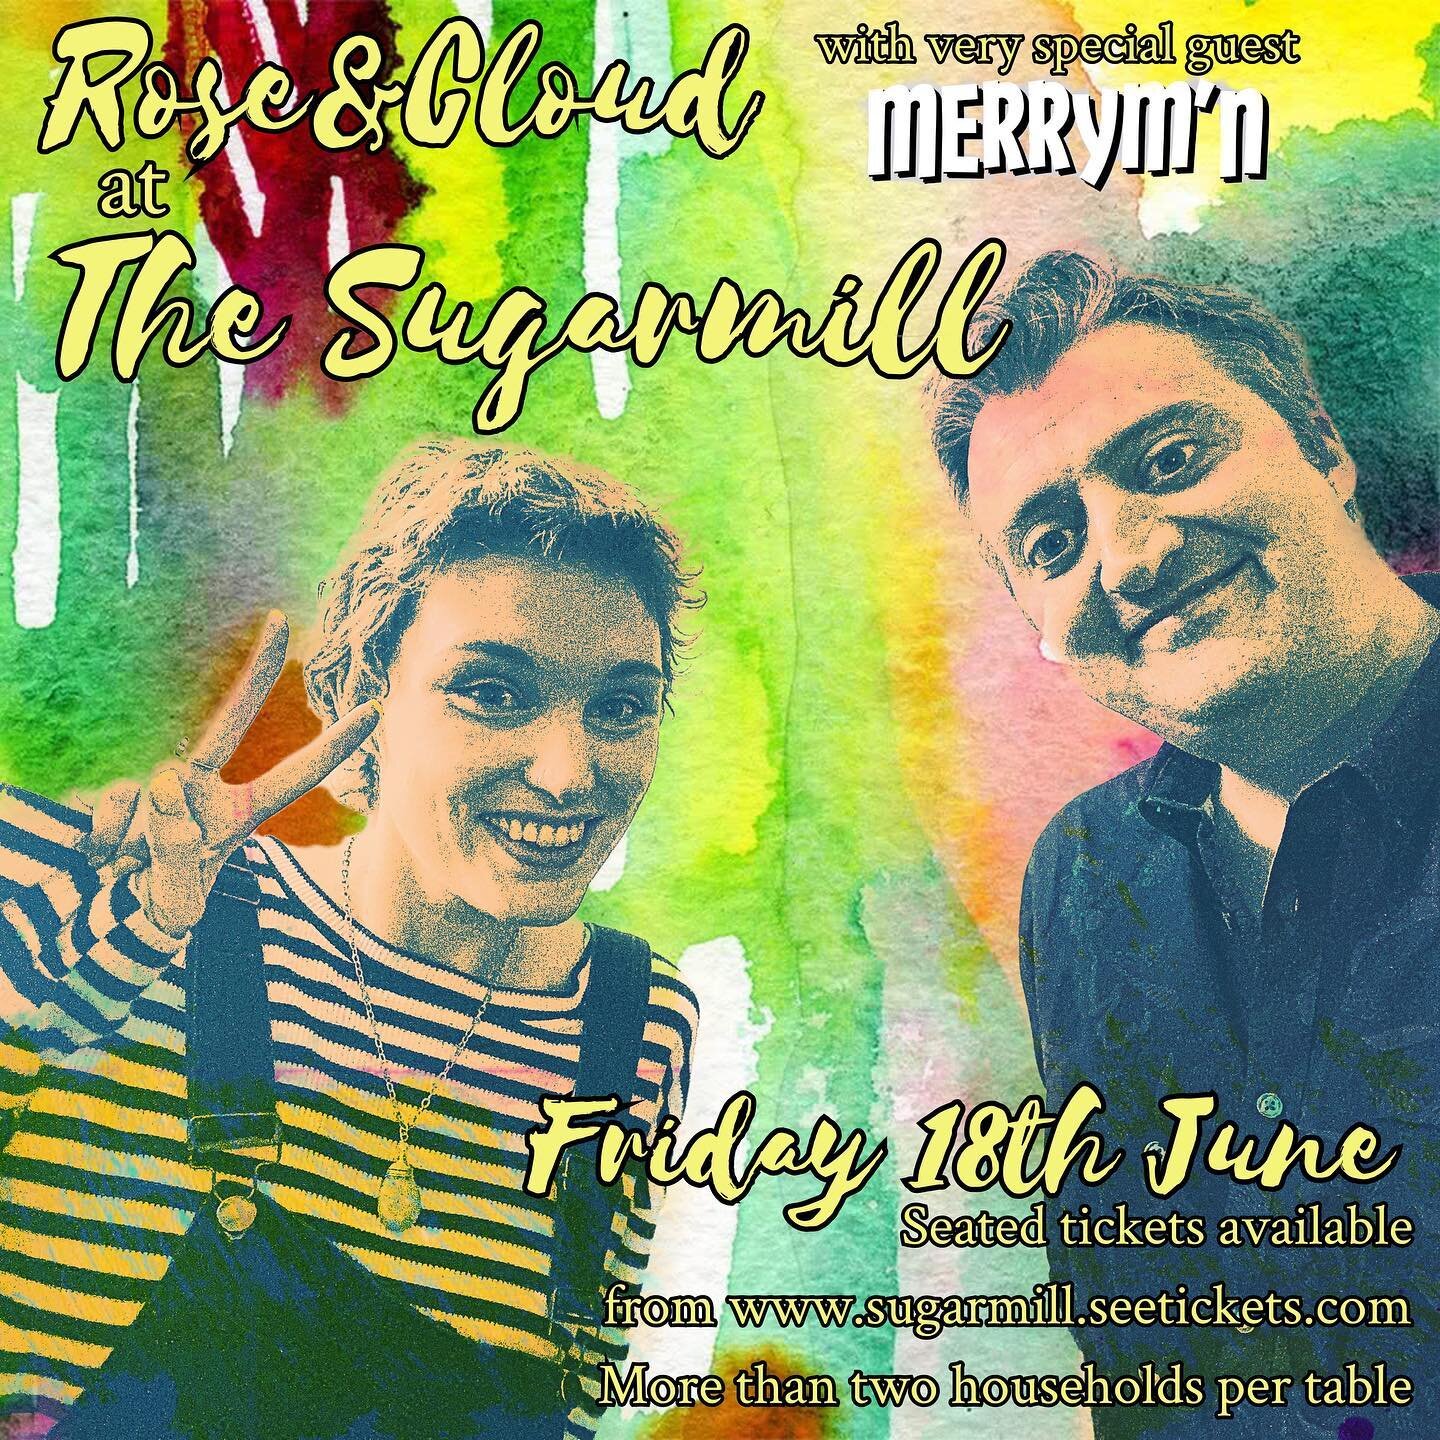 What a lovely sunny day!!! Can you BELIEVE we were in the same room to take this picture?  We&rsquo;ve not seen each other in months, and we are excitedly prepping our set for 18th June, we&rsquo;re going to have such a lovely time at The Sugarmill w